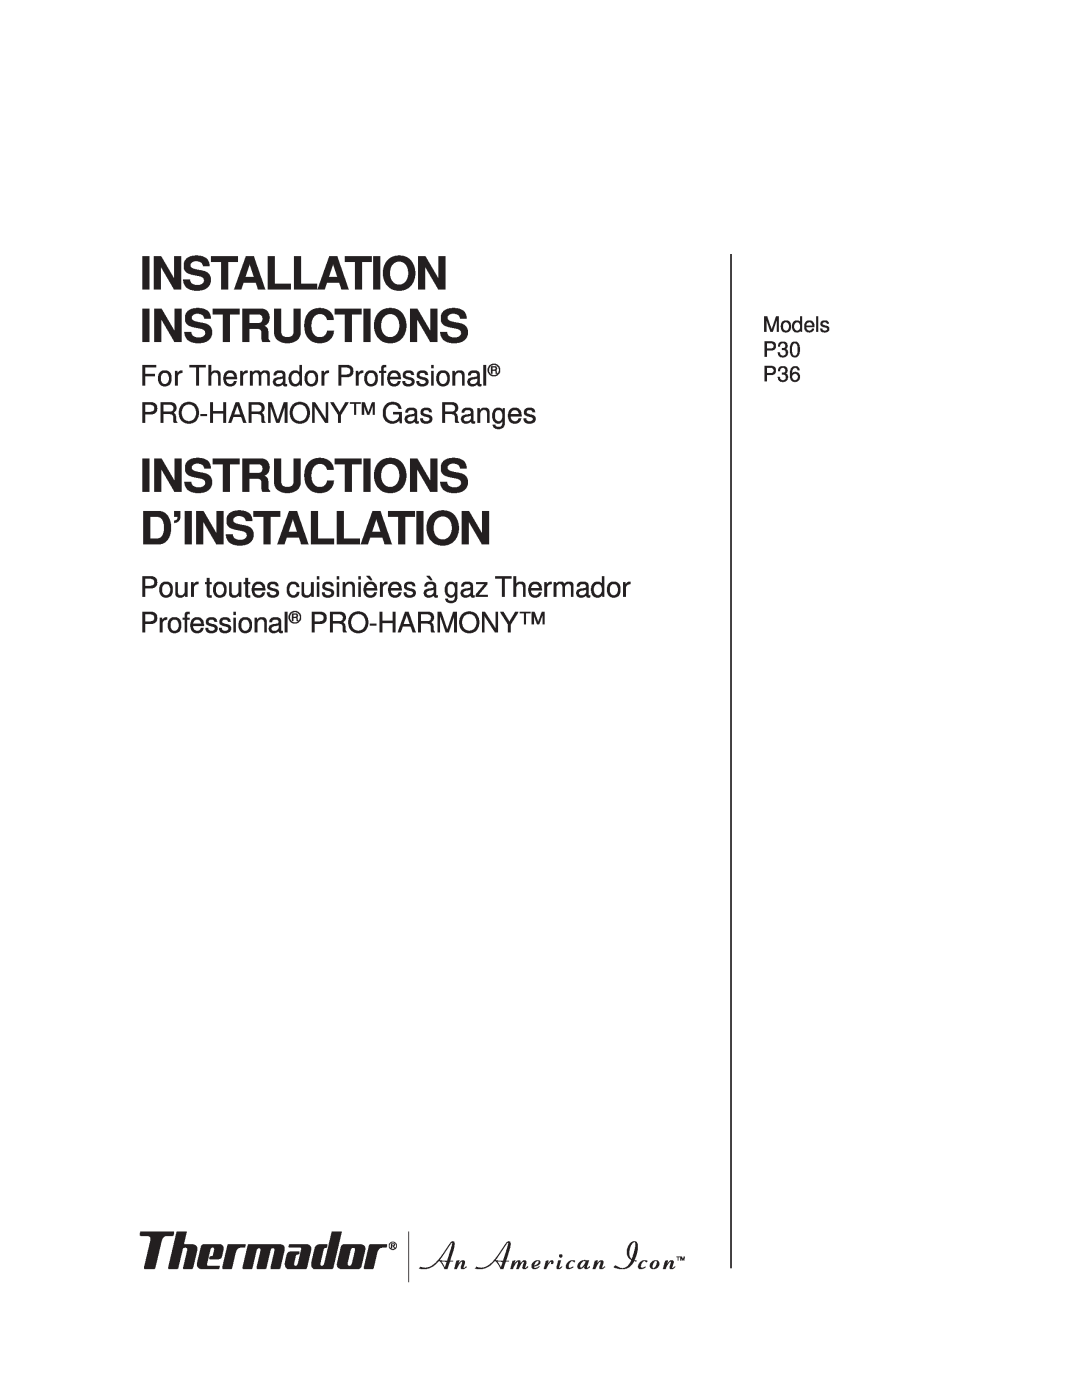 Thermador P30 installation instructions Installation Instructions, Instructions D’Installation 